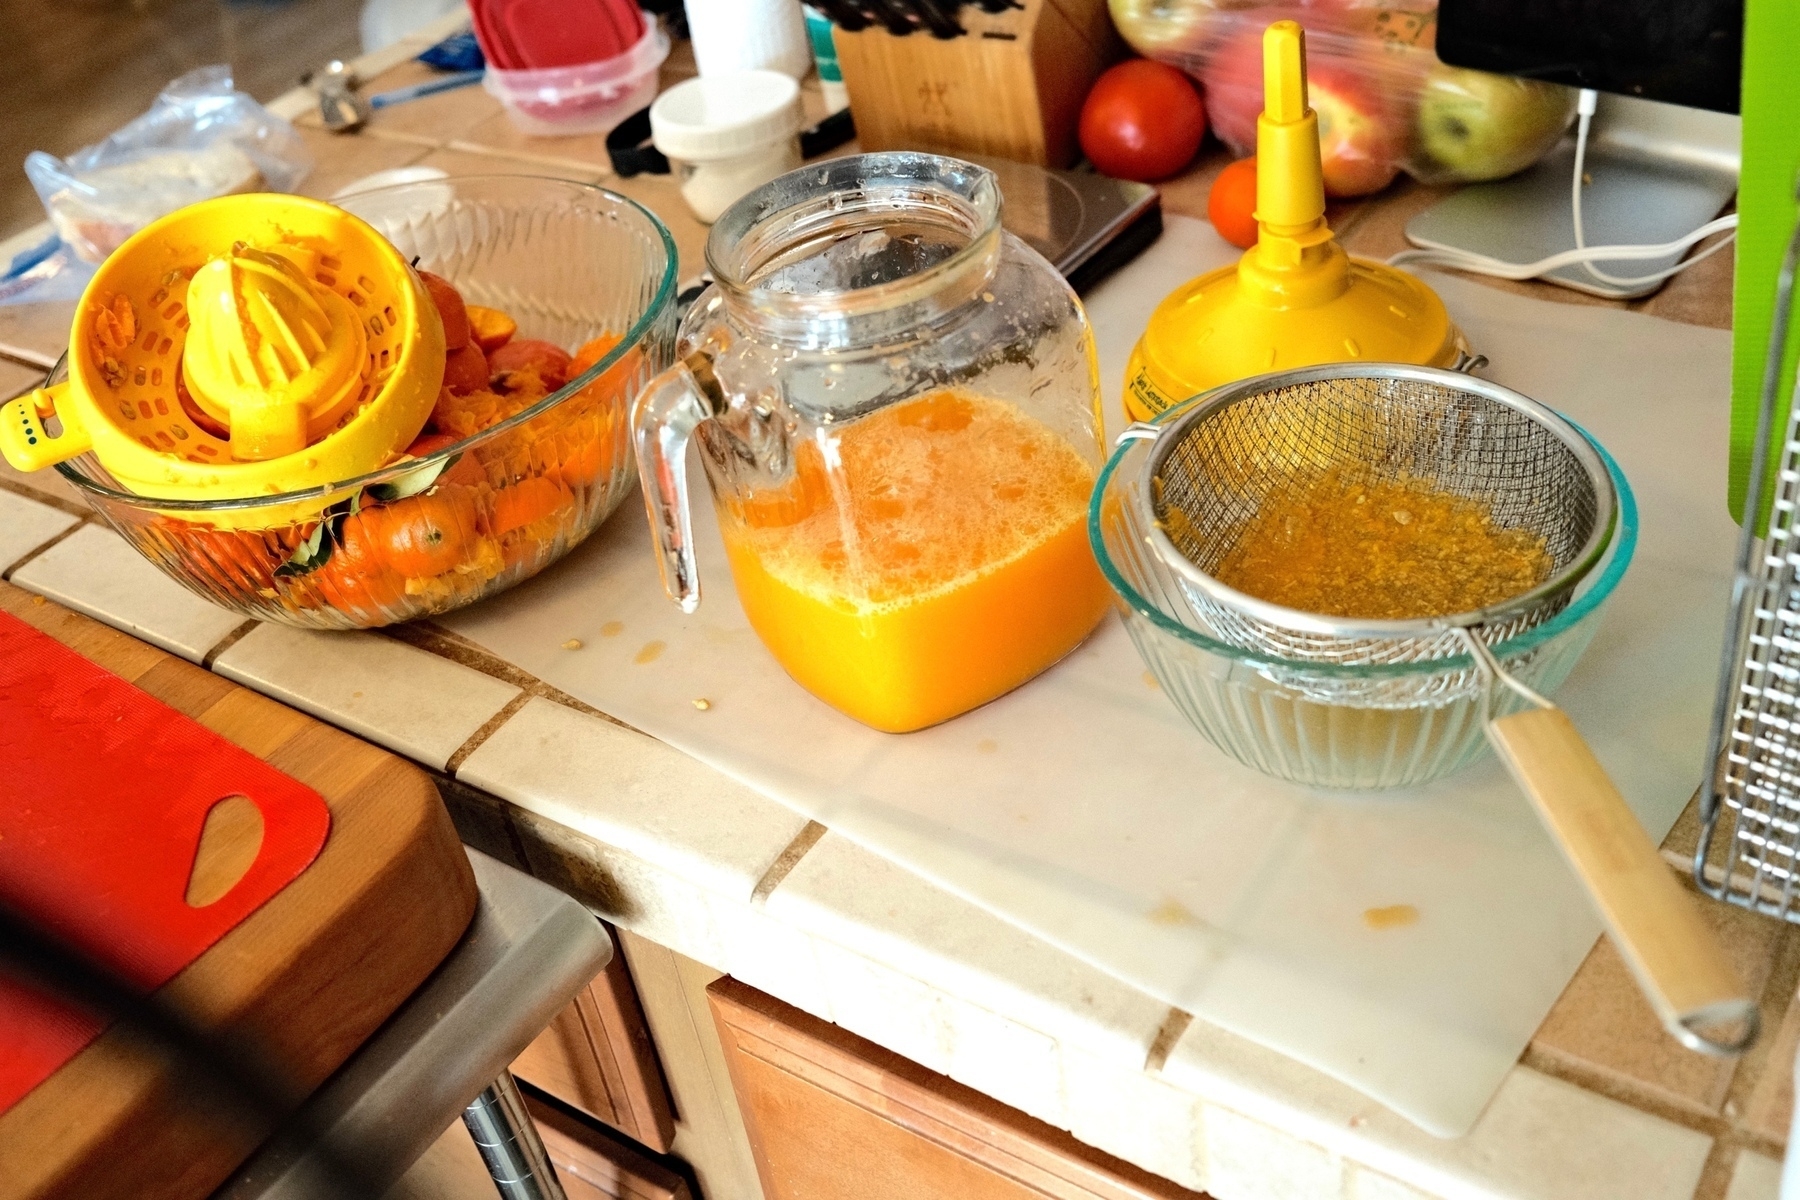 A counter covered in juicing equipment including a bowl full of rinds, a strainer sitting in a bowl, and very yellow juicer by Proctor Silex branded with Alex's Lemonade Stand.